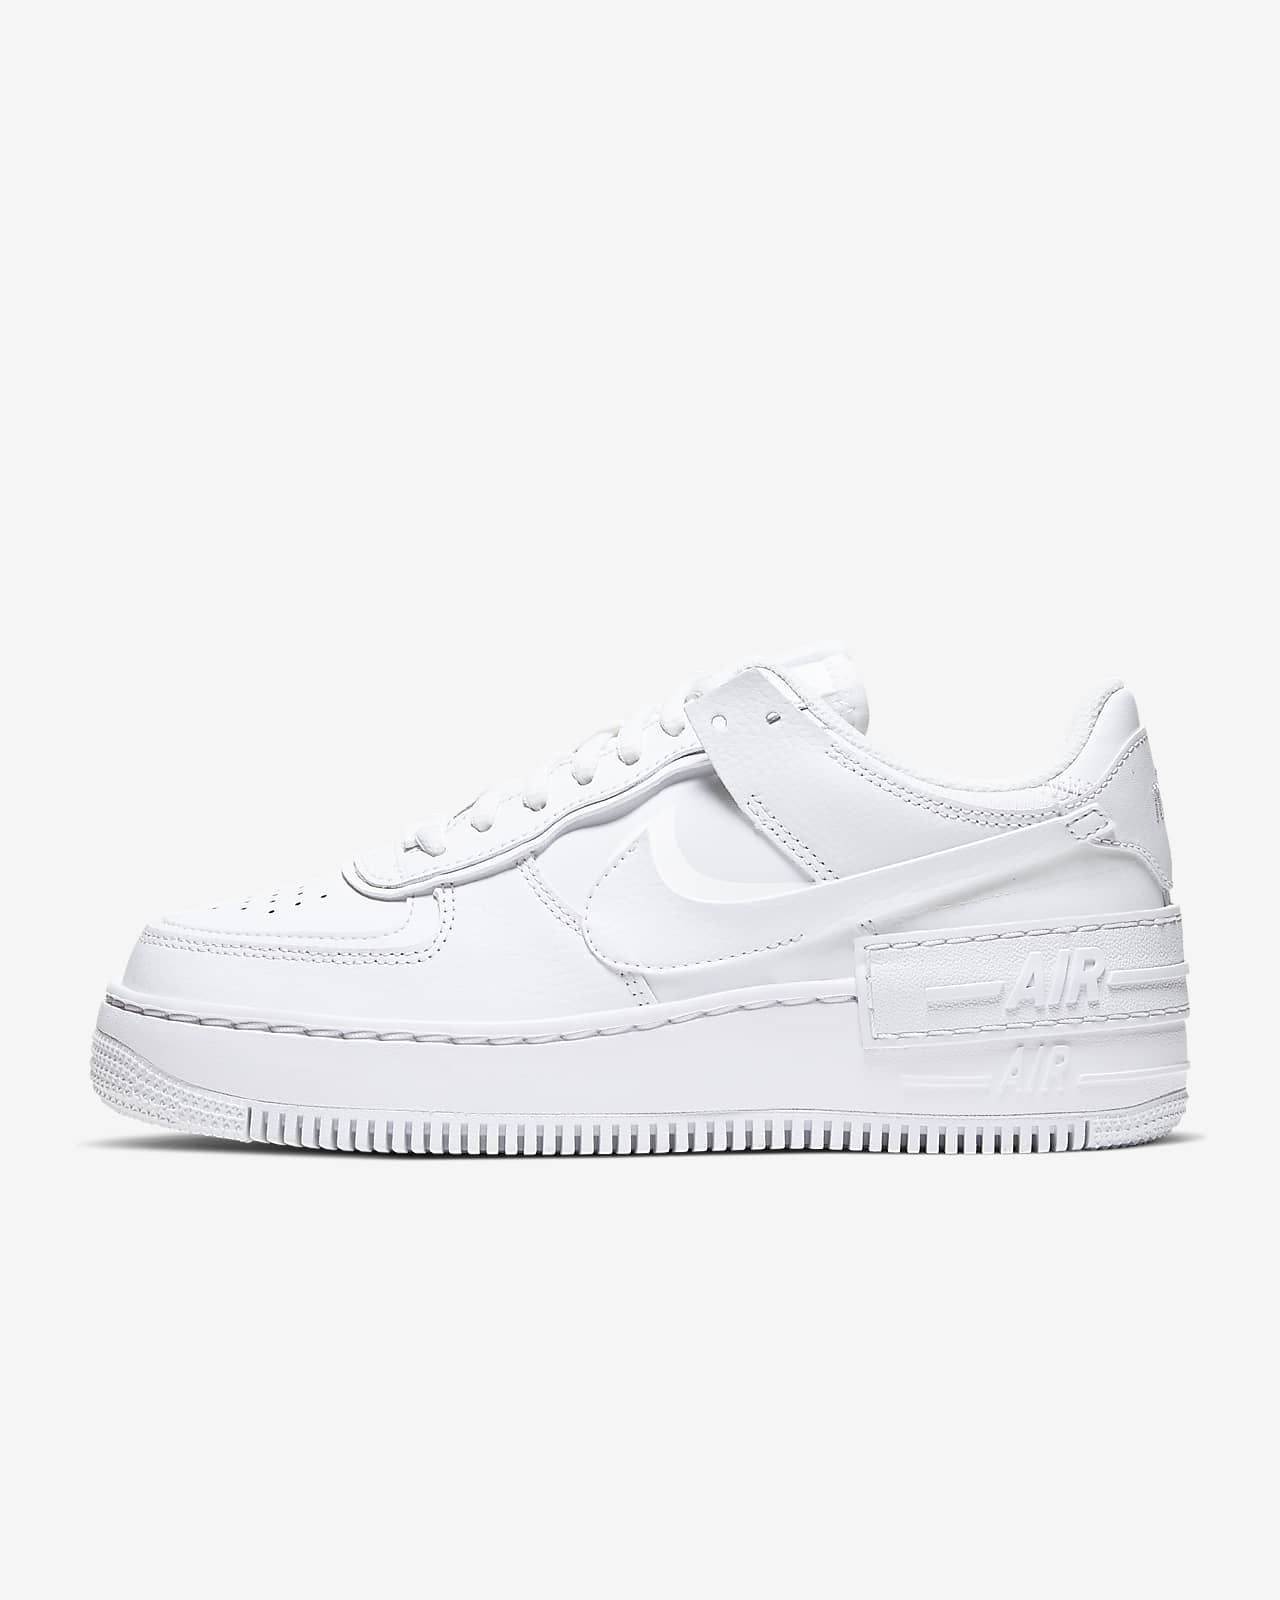 Nike Air Force 1 Shadow | Nike Asia Pacific